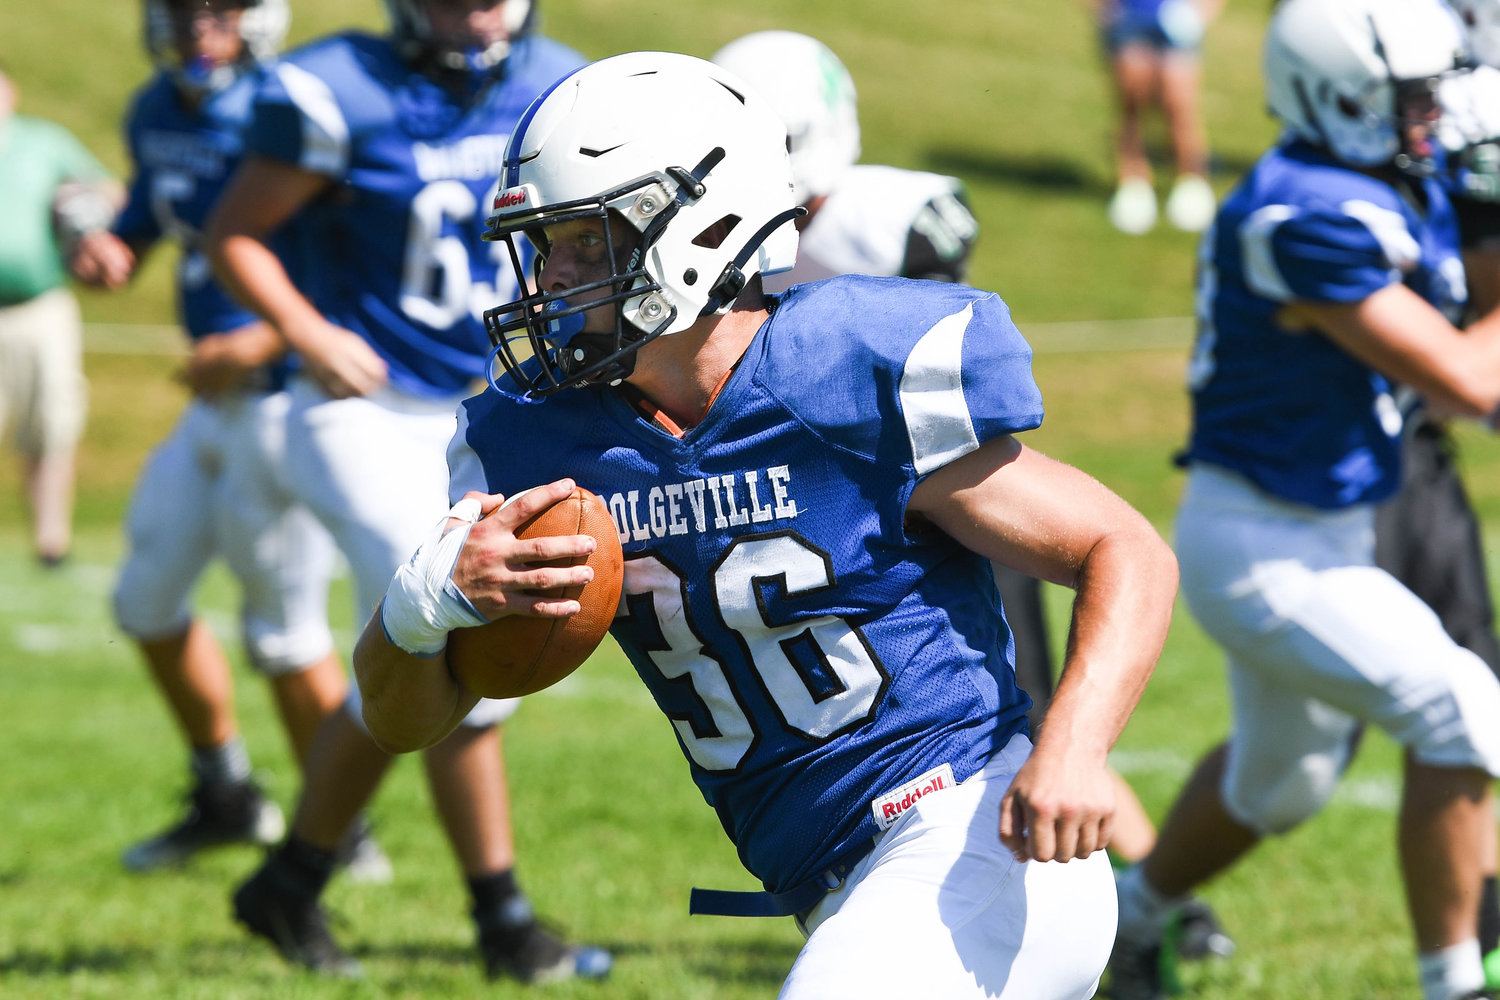 Dolgeville running back Jared Bilinski runs the football during the Class D game against Herkimer on Saturday. The Blue Devils won 68-20.